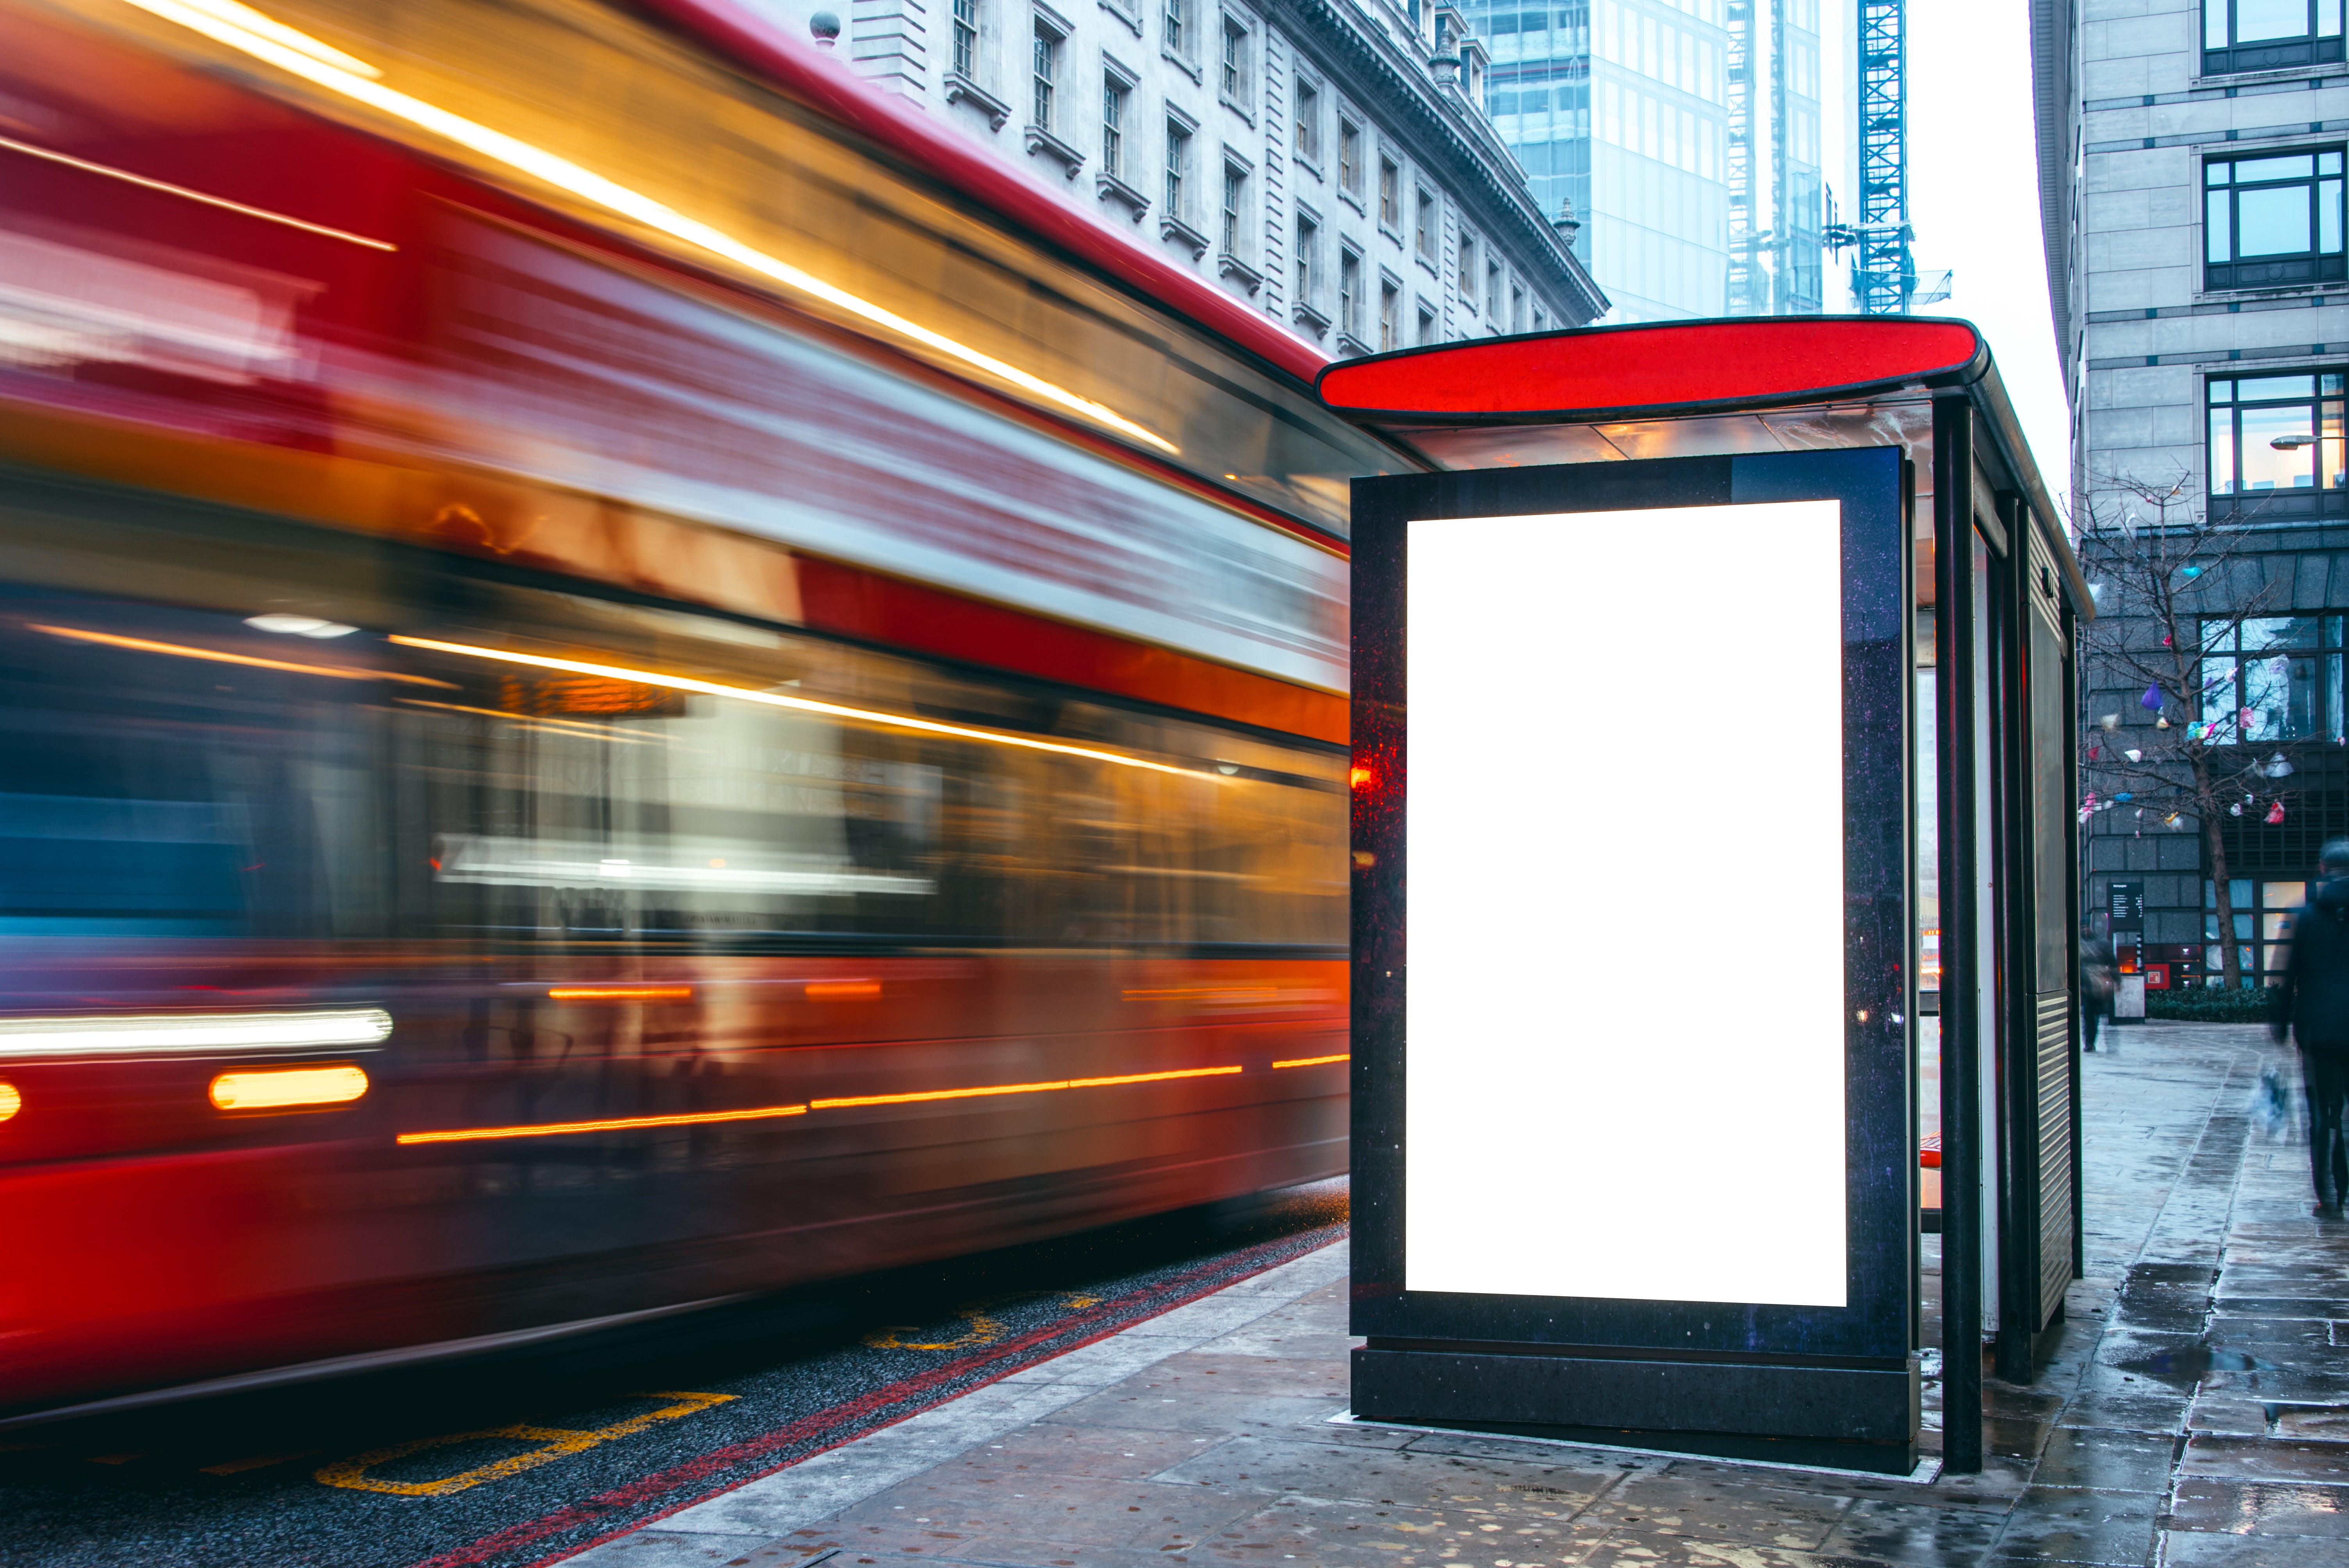 A blurred London bus drives past a bus stop with an blank advert poster on it